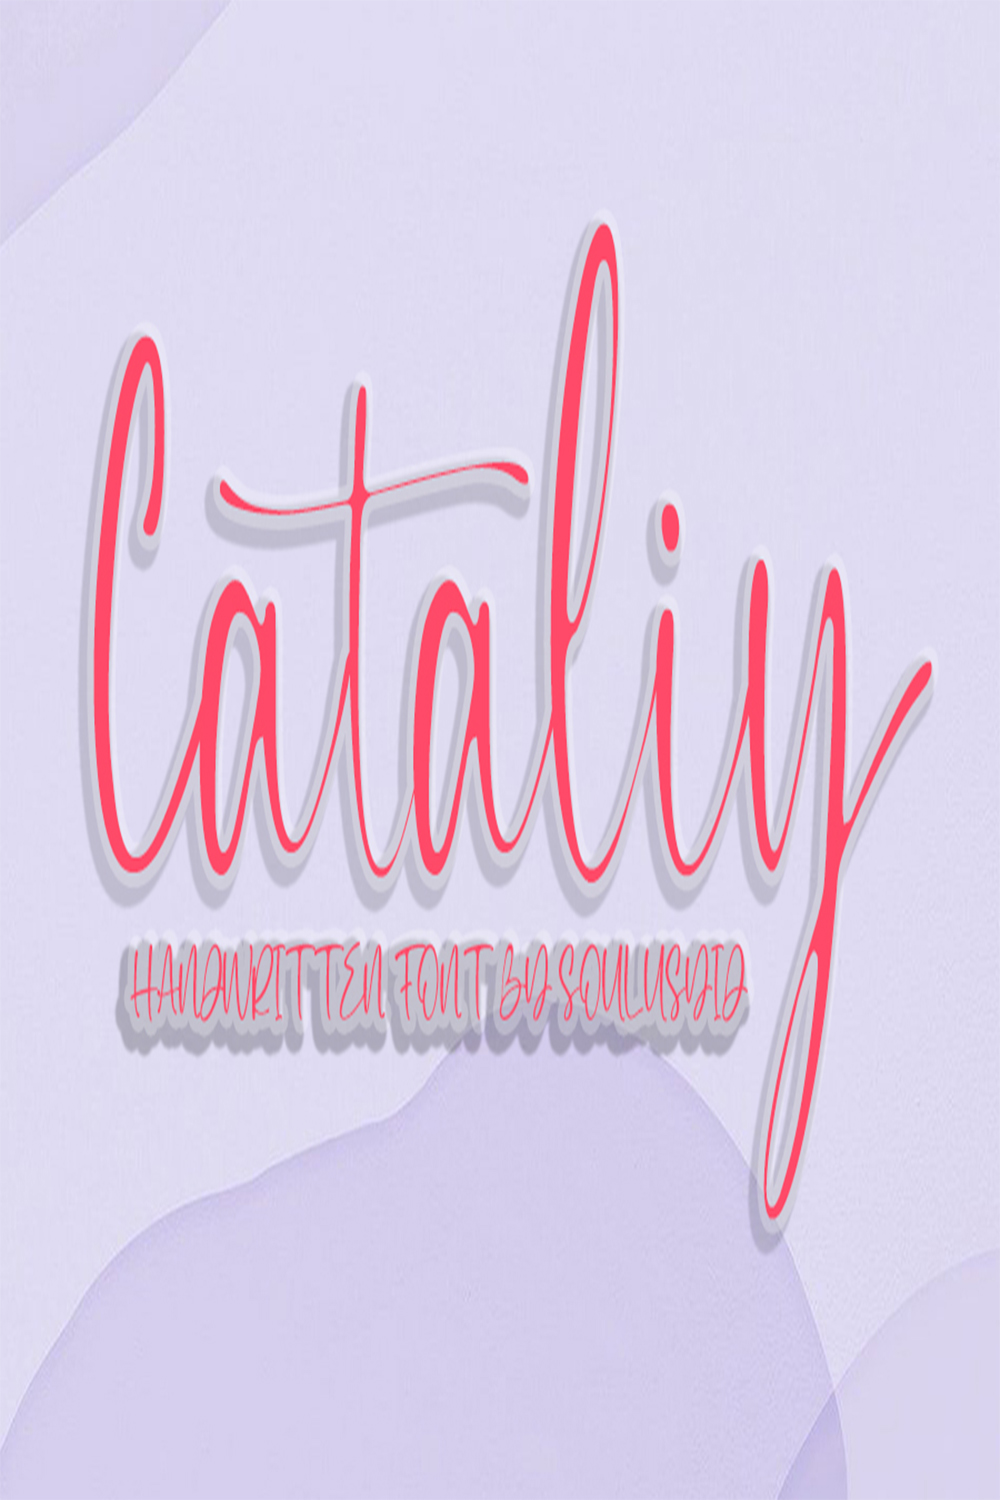 Cataliy pinterest preview image.